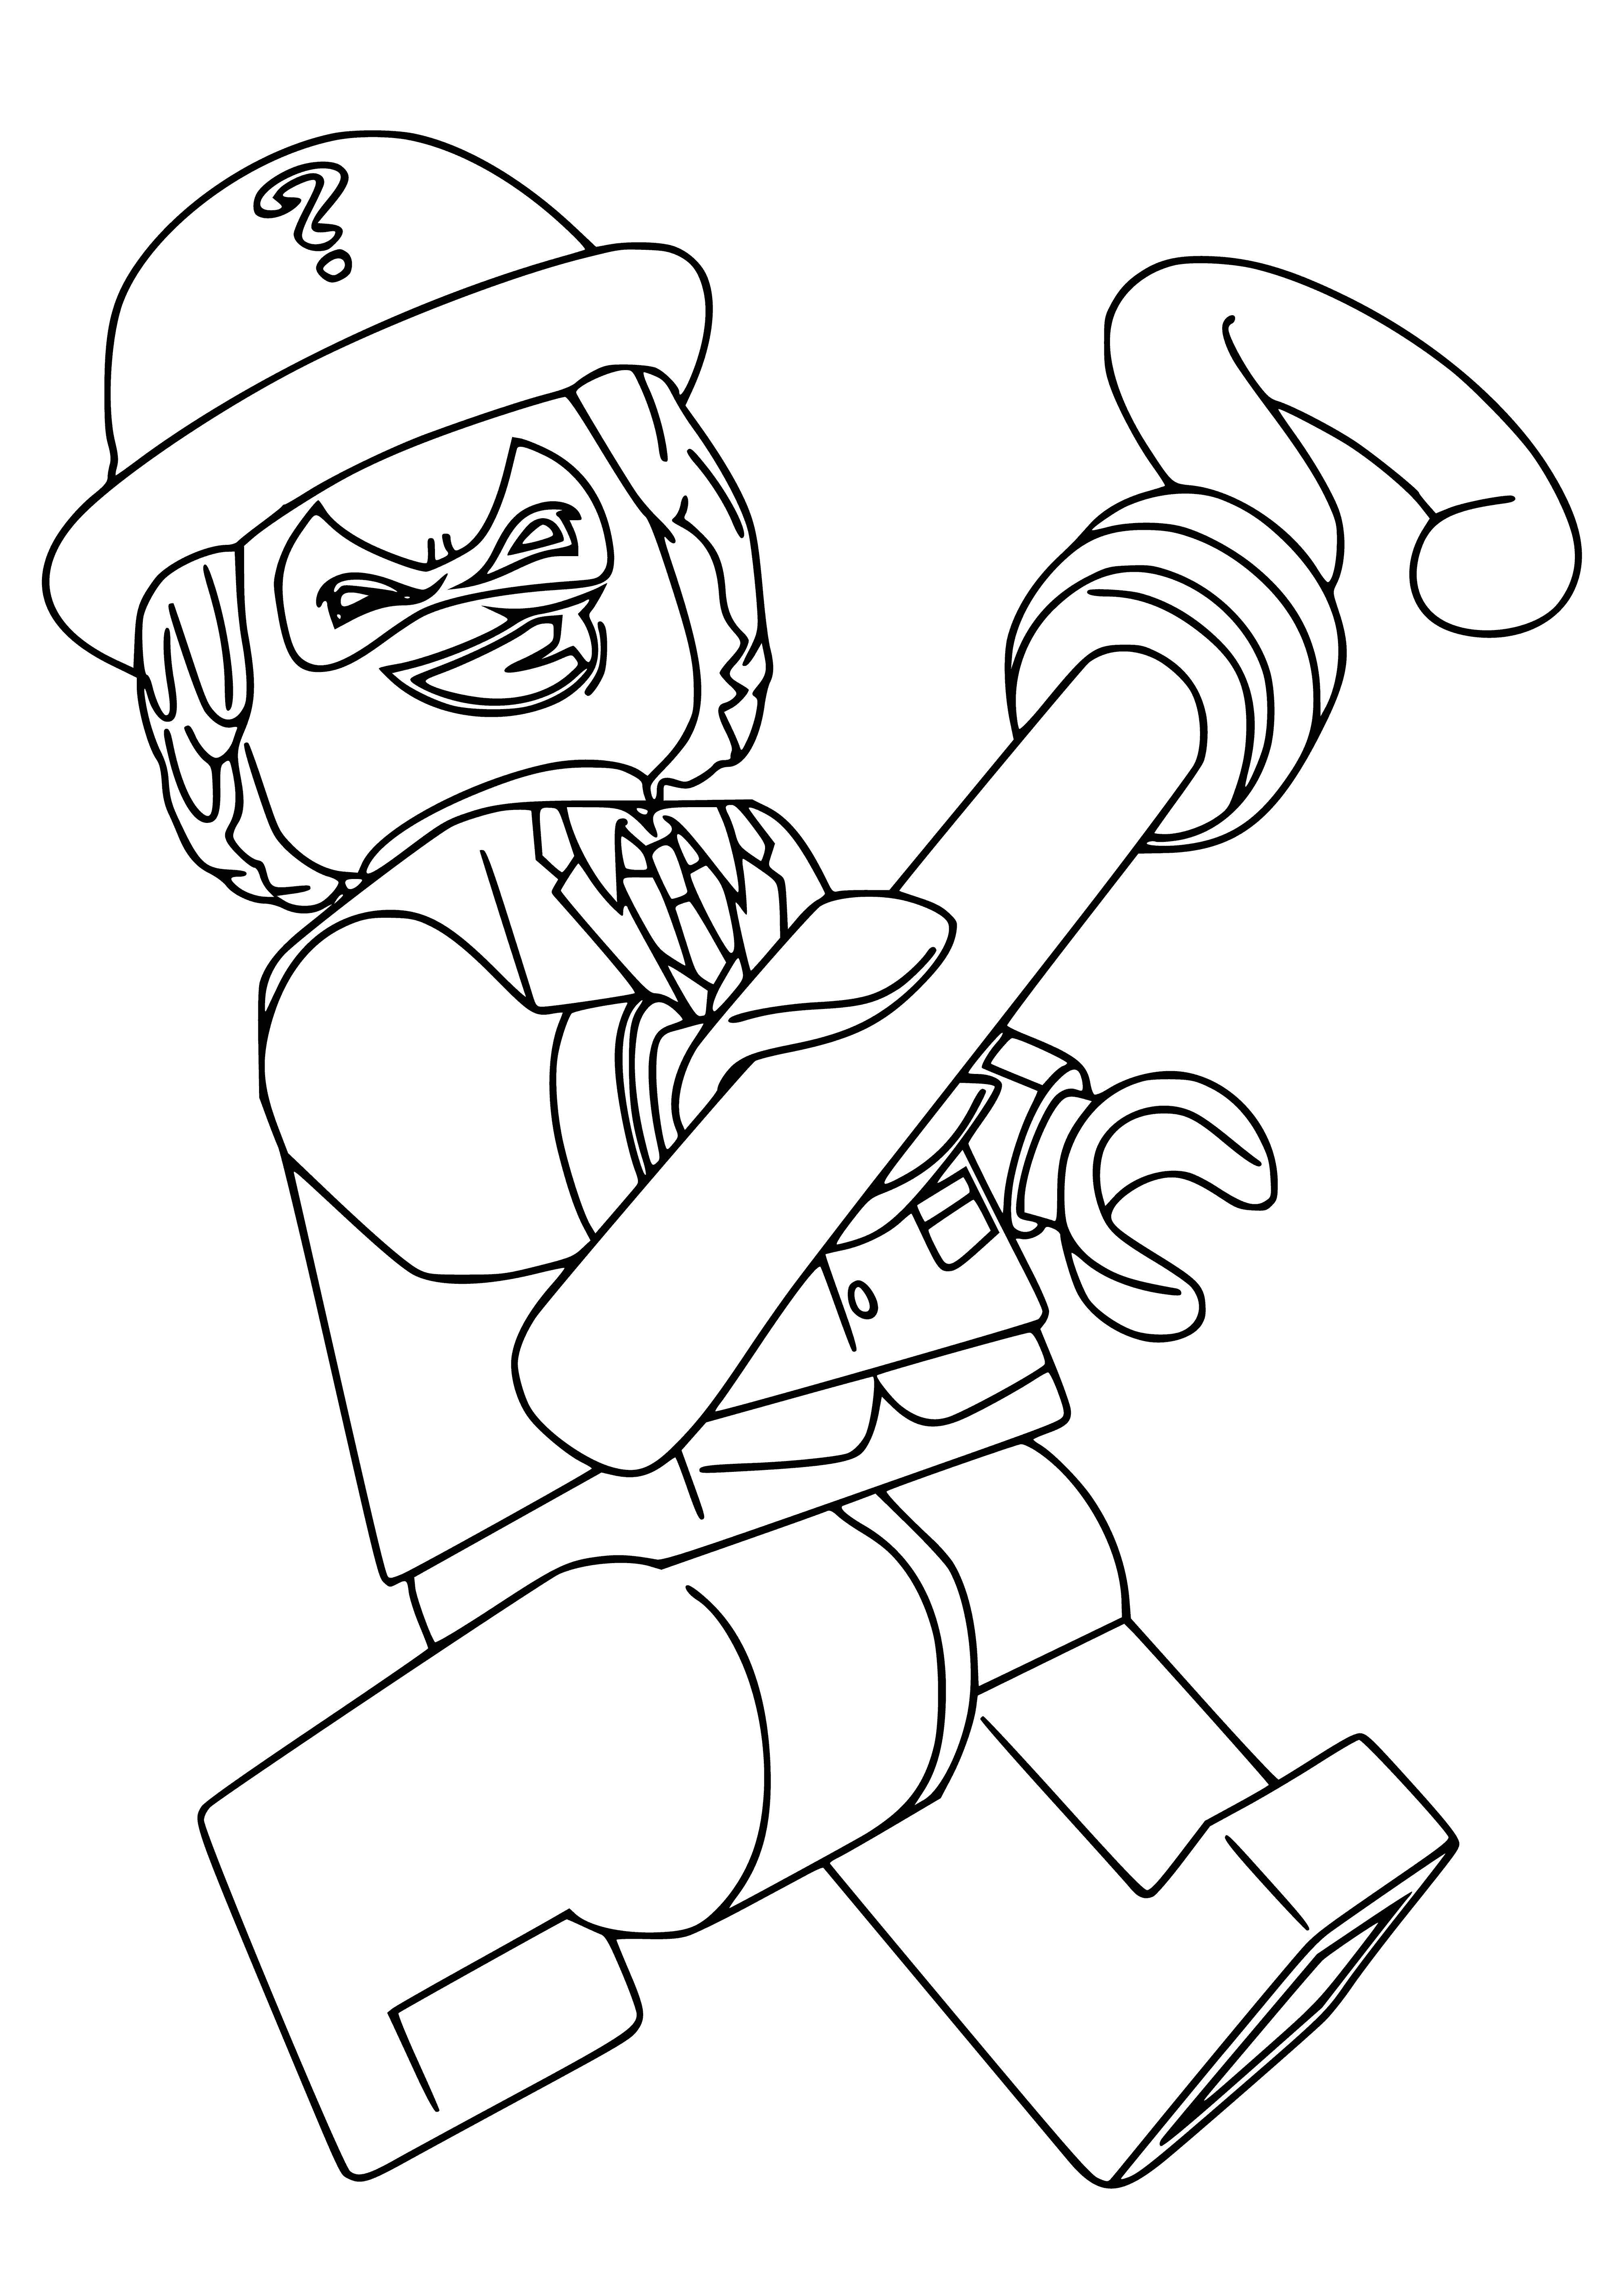 coloring page: LEGO Batman - Riddler is a figure with green suit, black mask, cape, and hat with question mark. He holds a cane in his left hand.